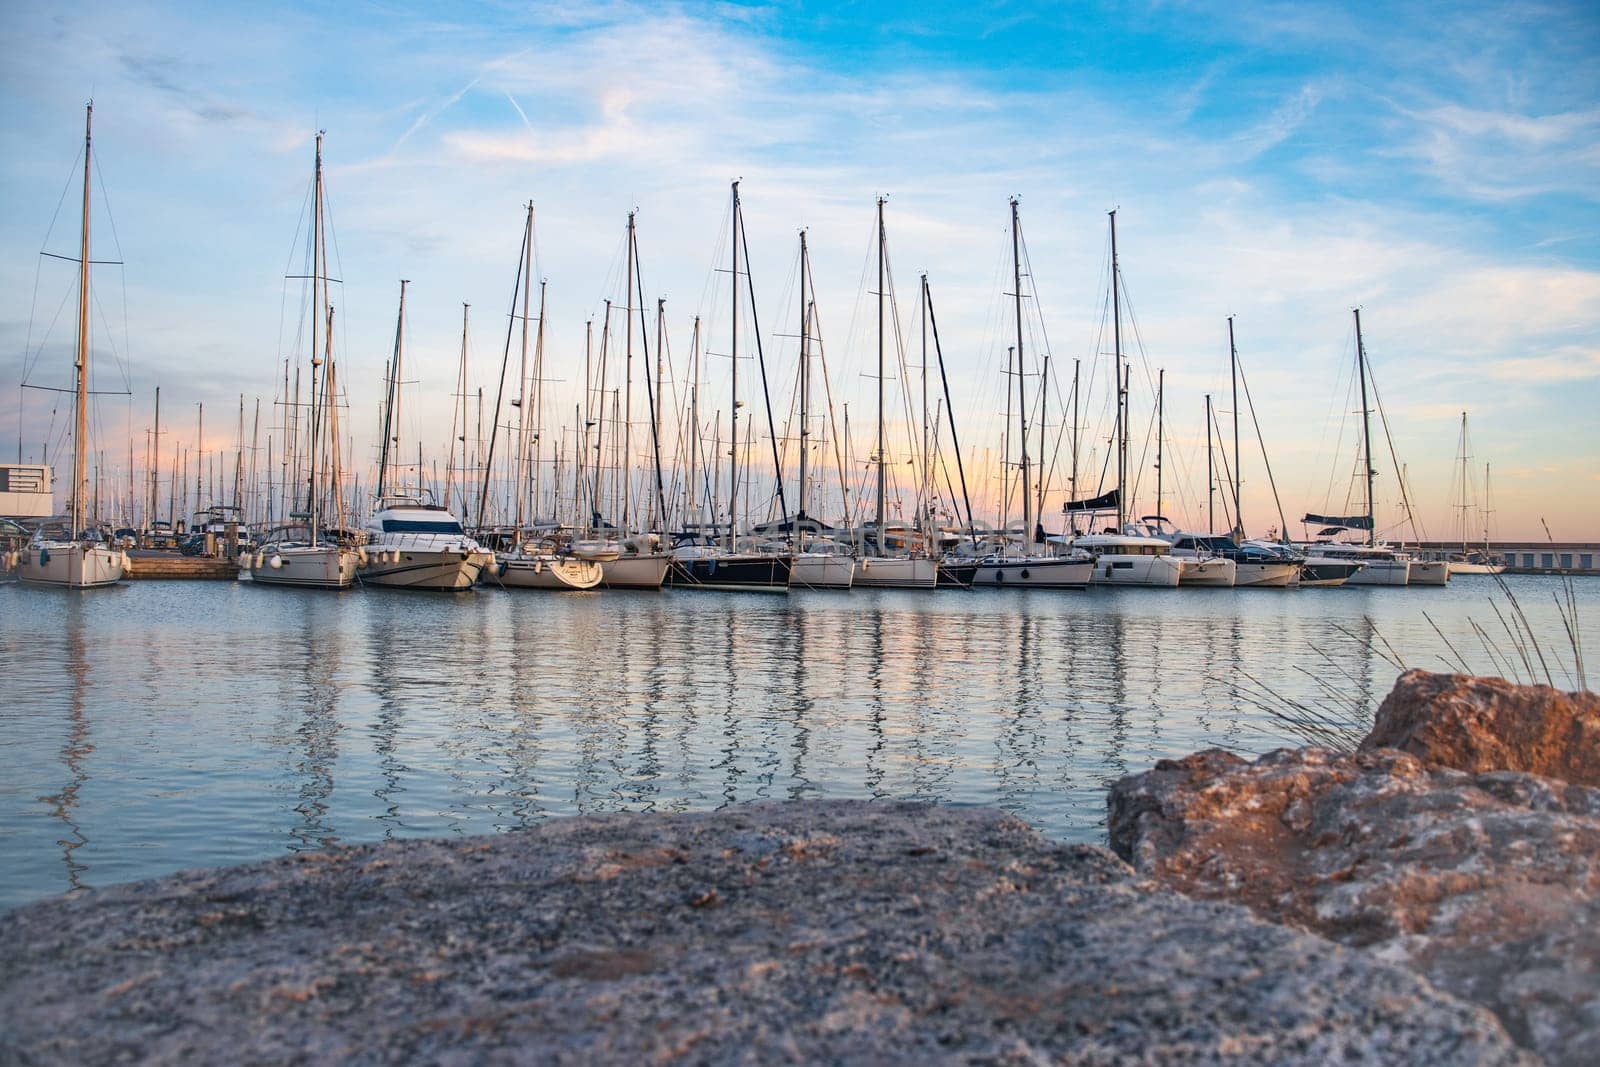 Sailboat harbor in the port evening photo. Beautiful moored sail yachts in the sea, modern water transport Barcelona, Catalonia. Bright sunset and dusk. High quality picture for wallpaper, article